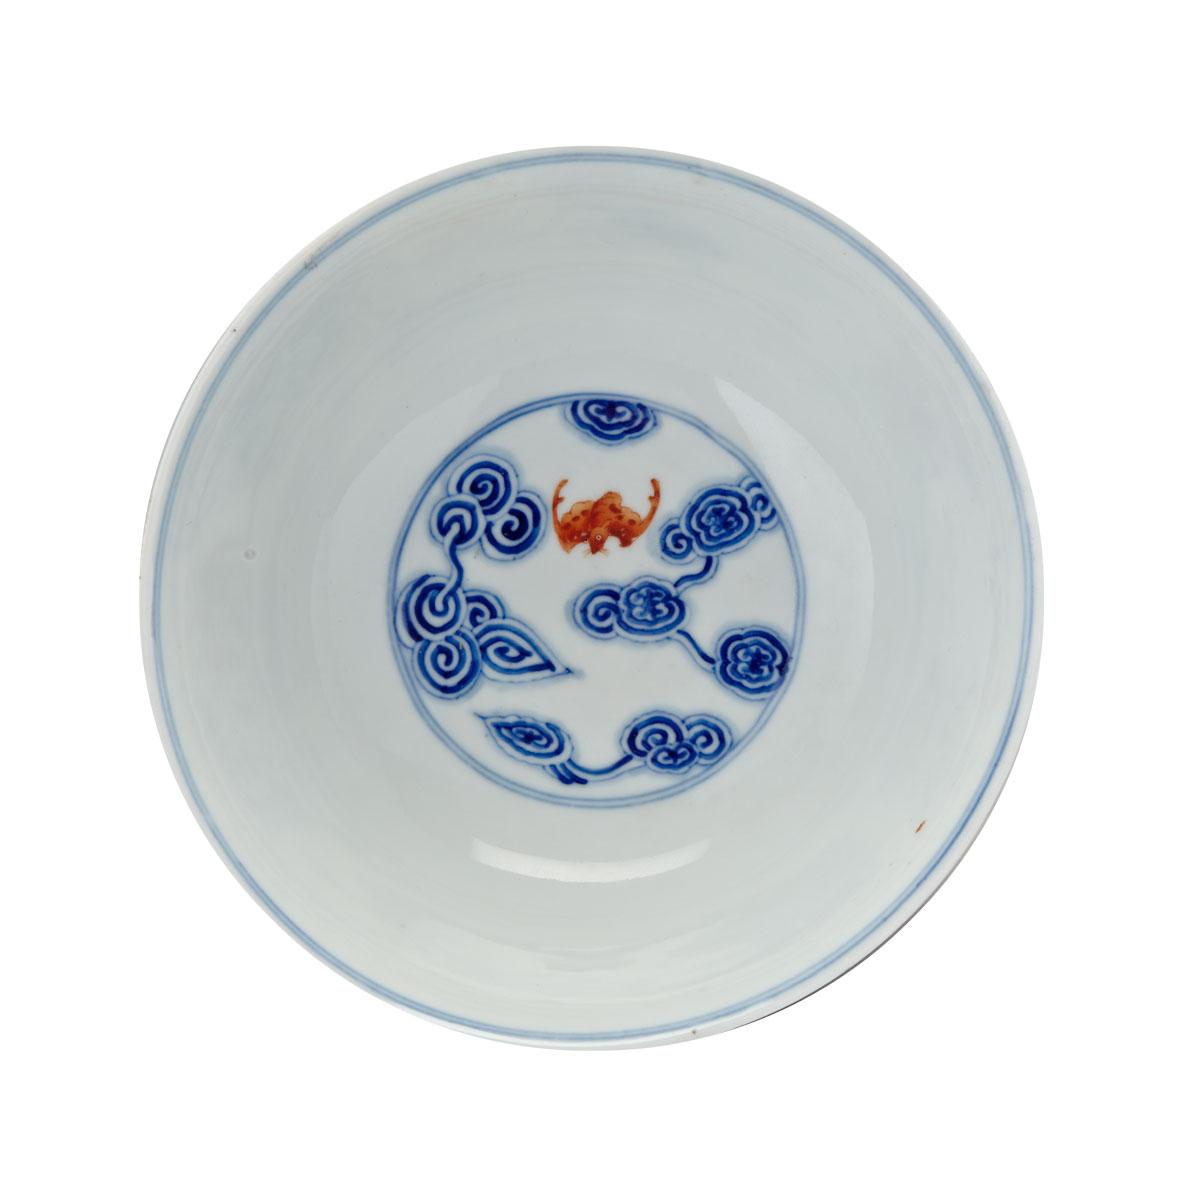 Blue, White and Iron Red Bat Bowl, Guangxu Mark and Period (1875-1908)